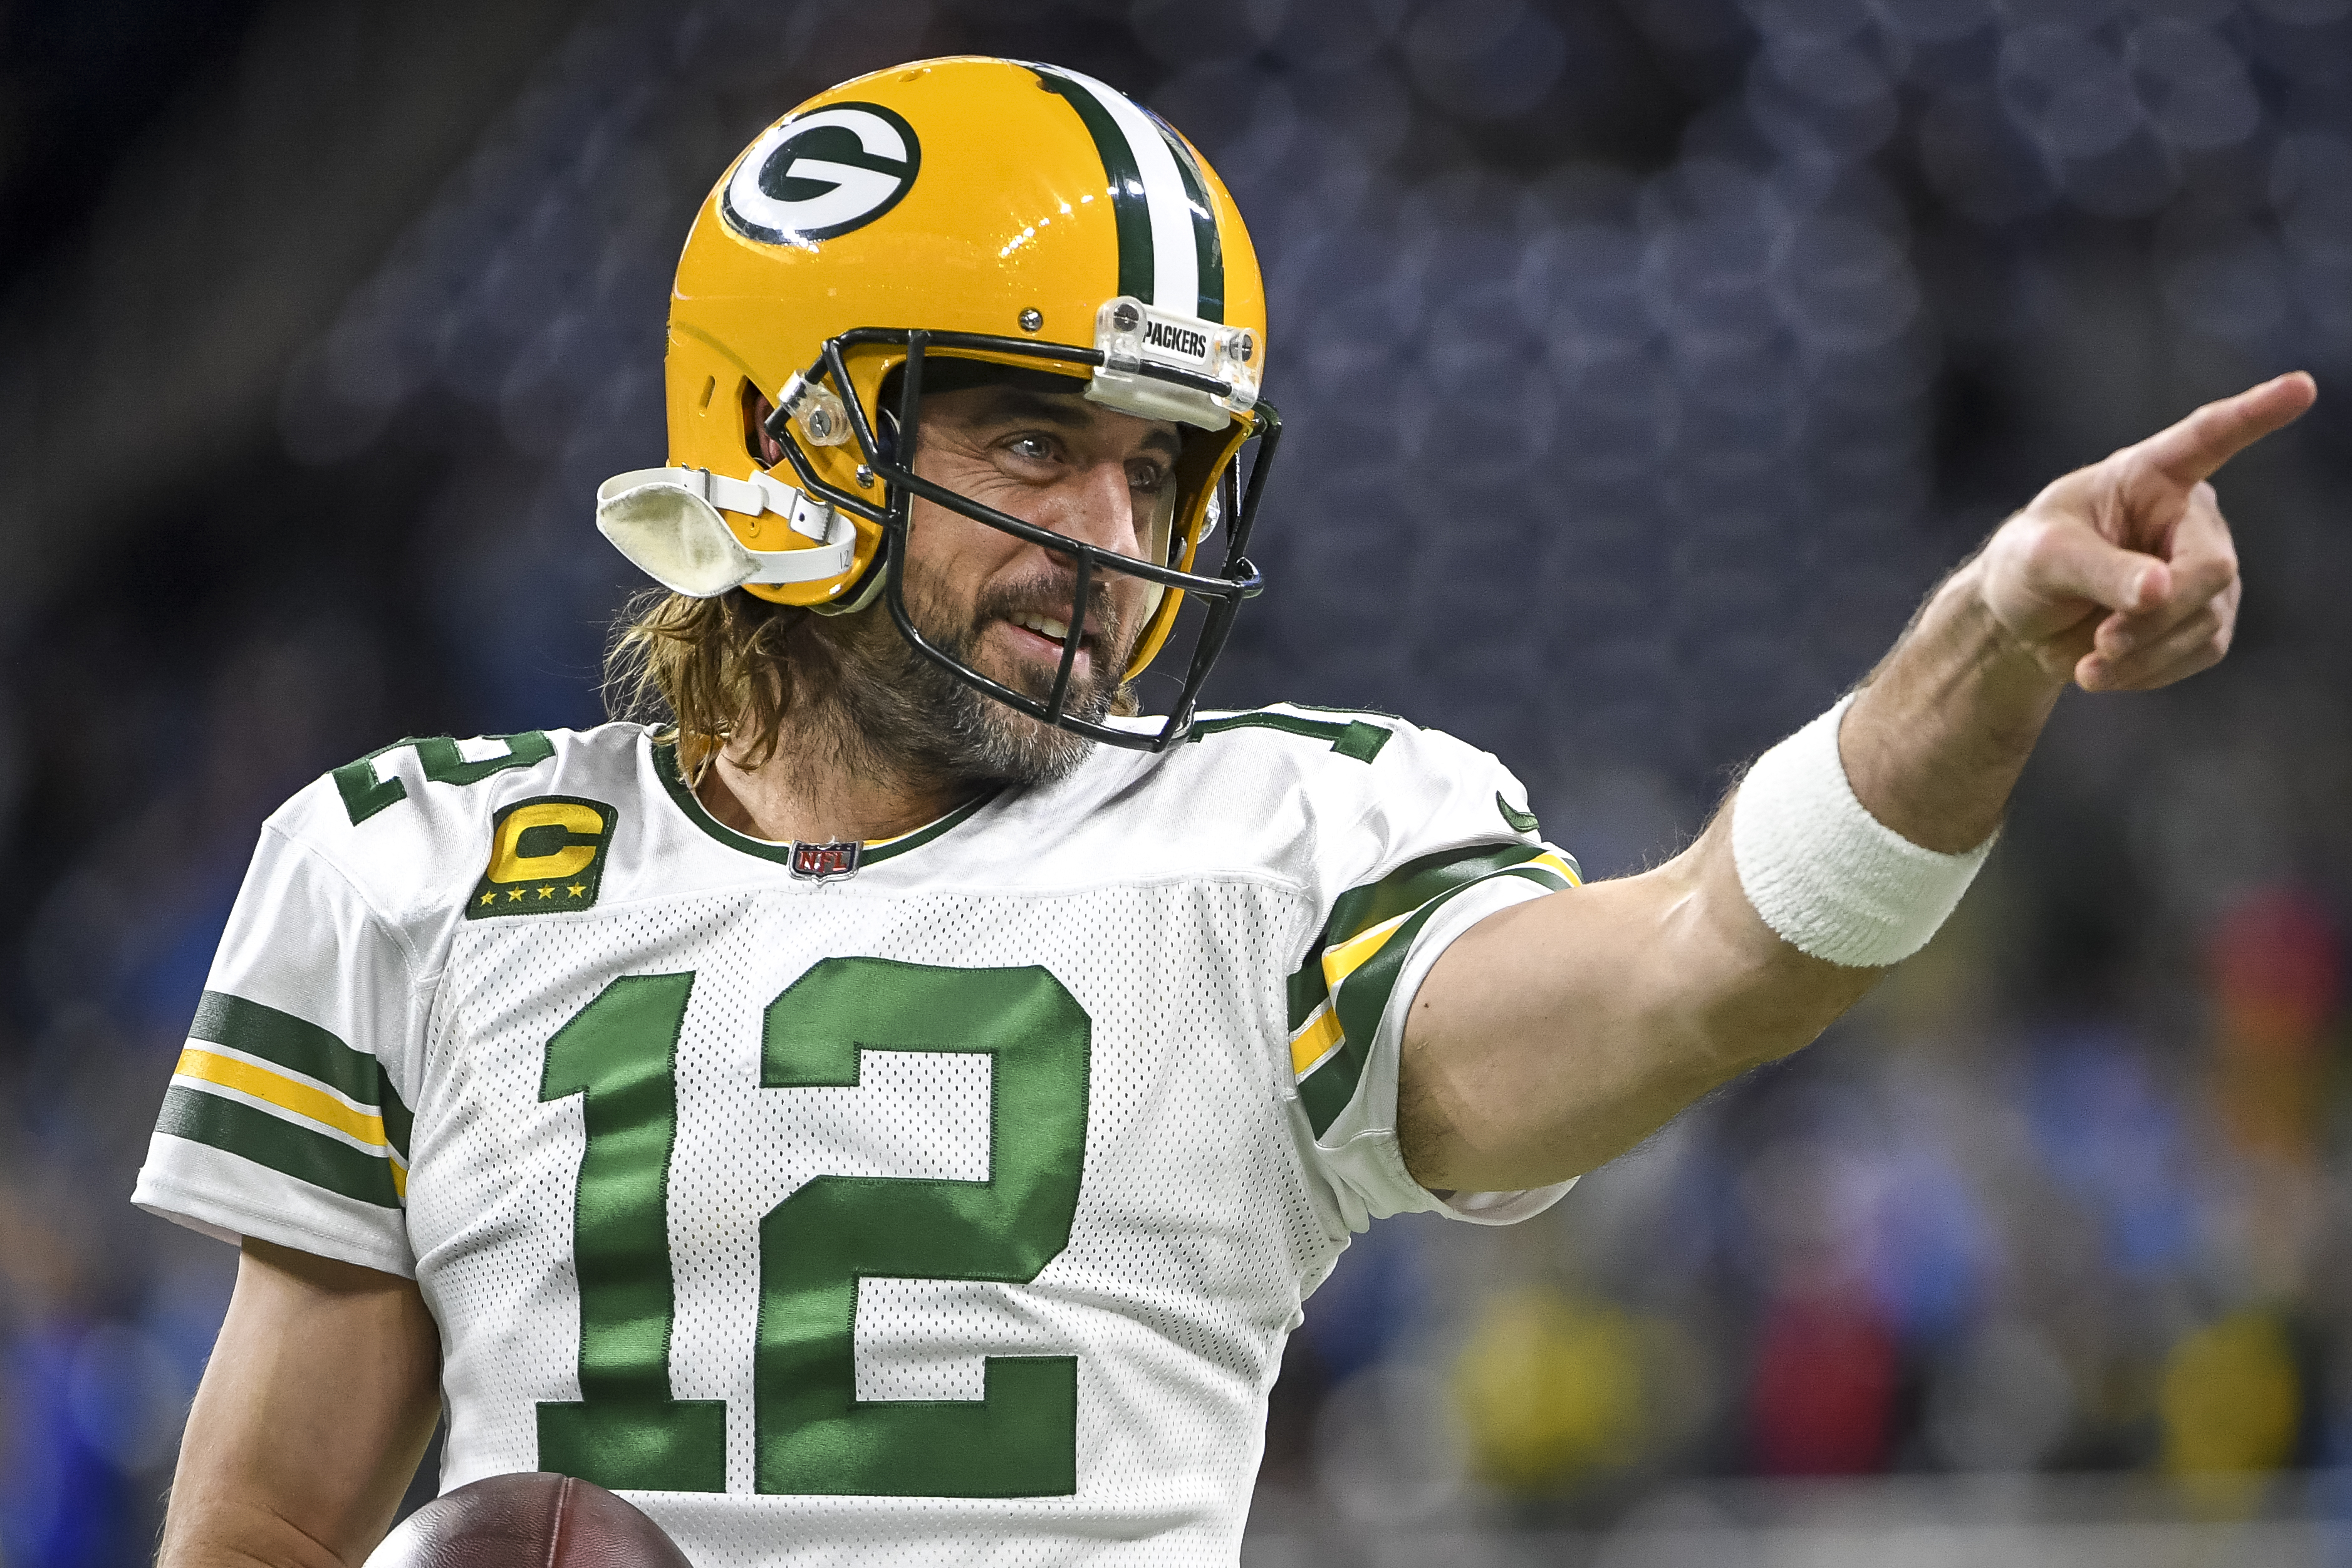 Pat McAfee Show Today: How to Watch and Time for Aaron Rodgers Appearance